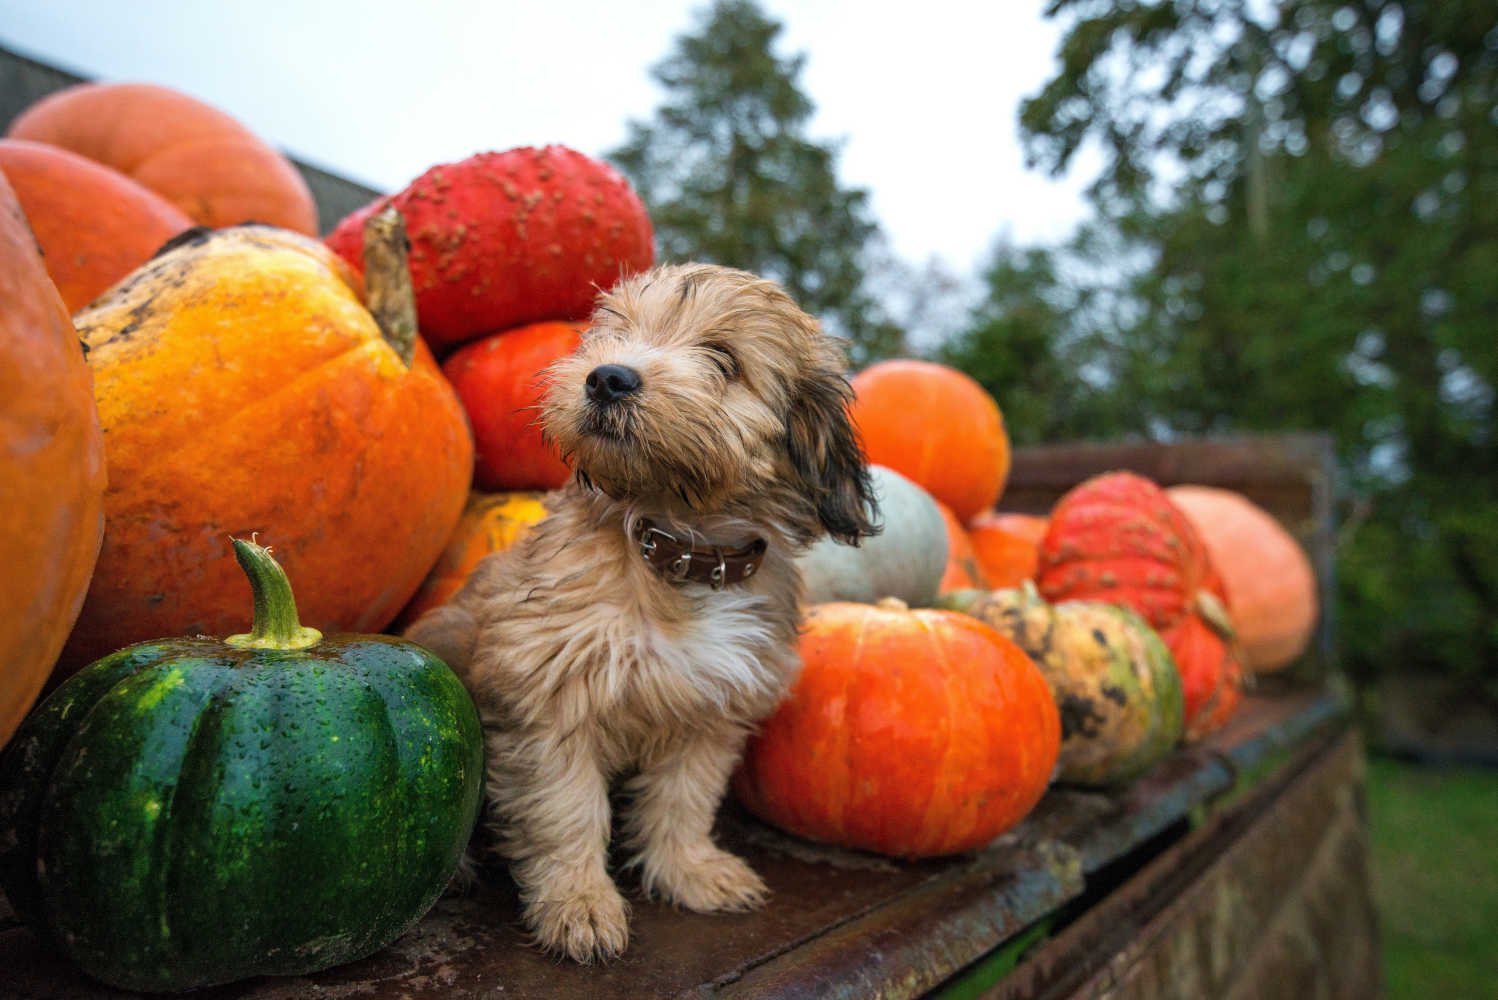 A shaggy brown dog sitting with a stack of multi-colored pumpkins.